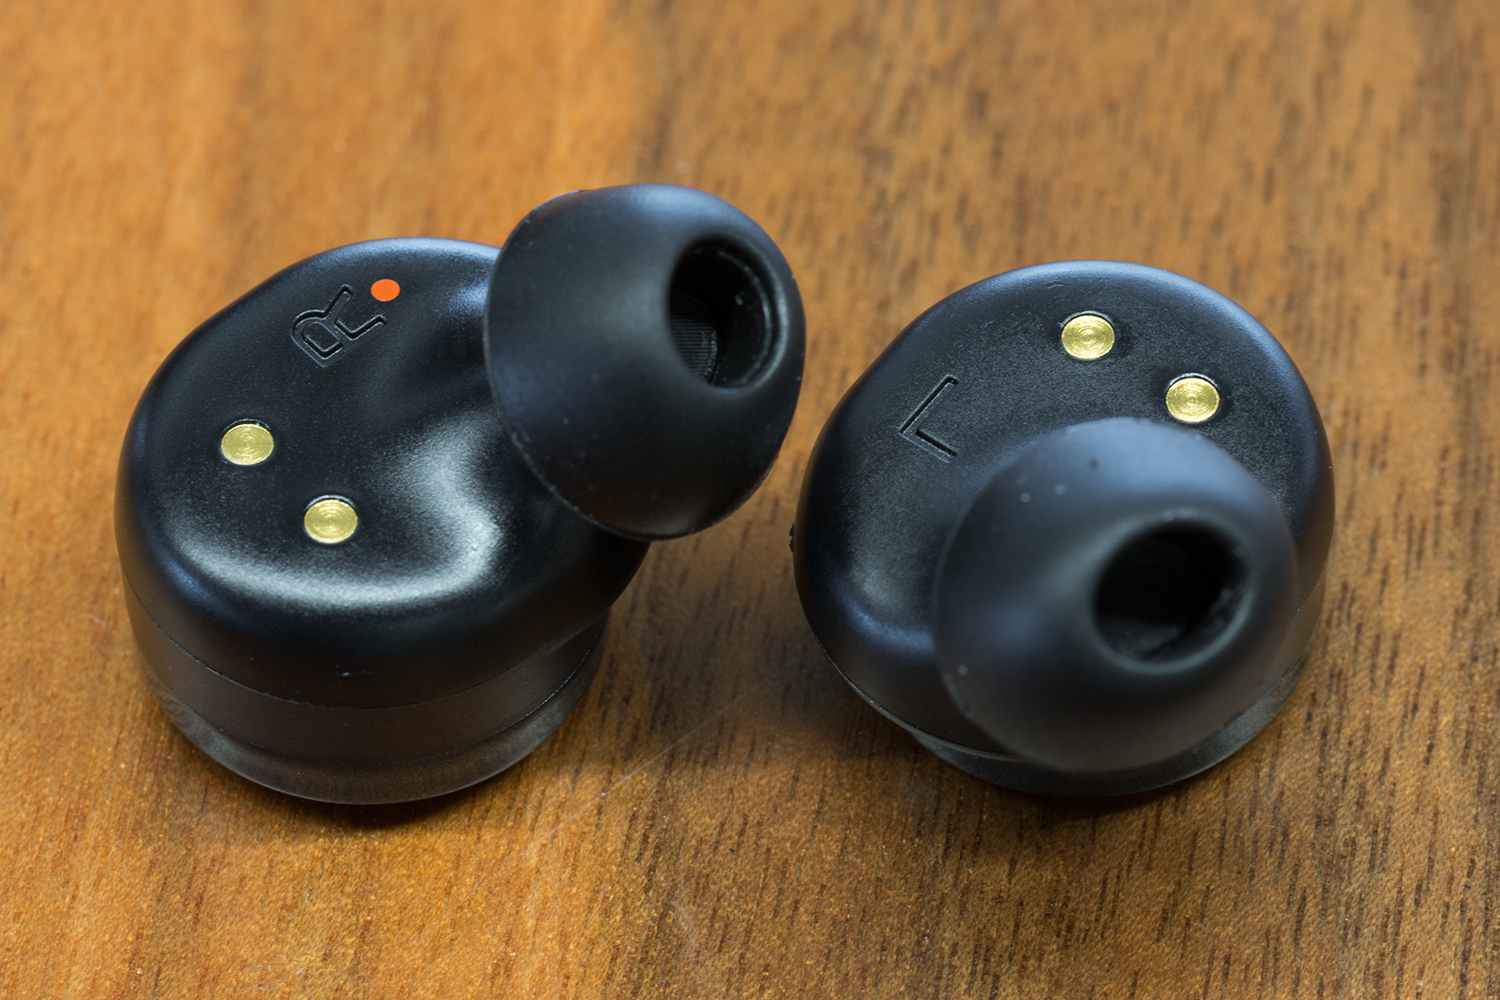 here active listening system hands on earbuds maincuv2